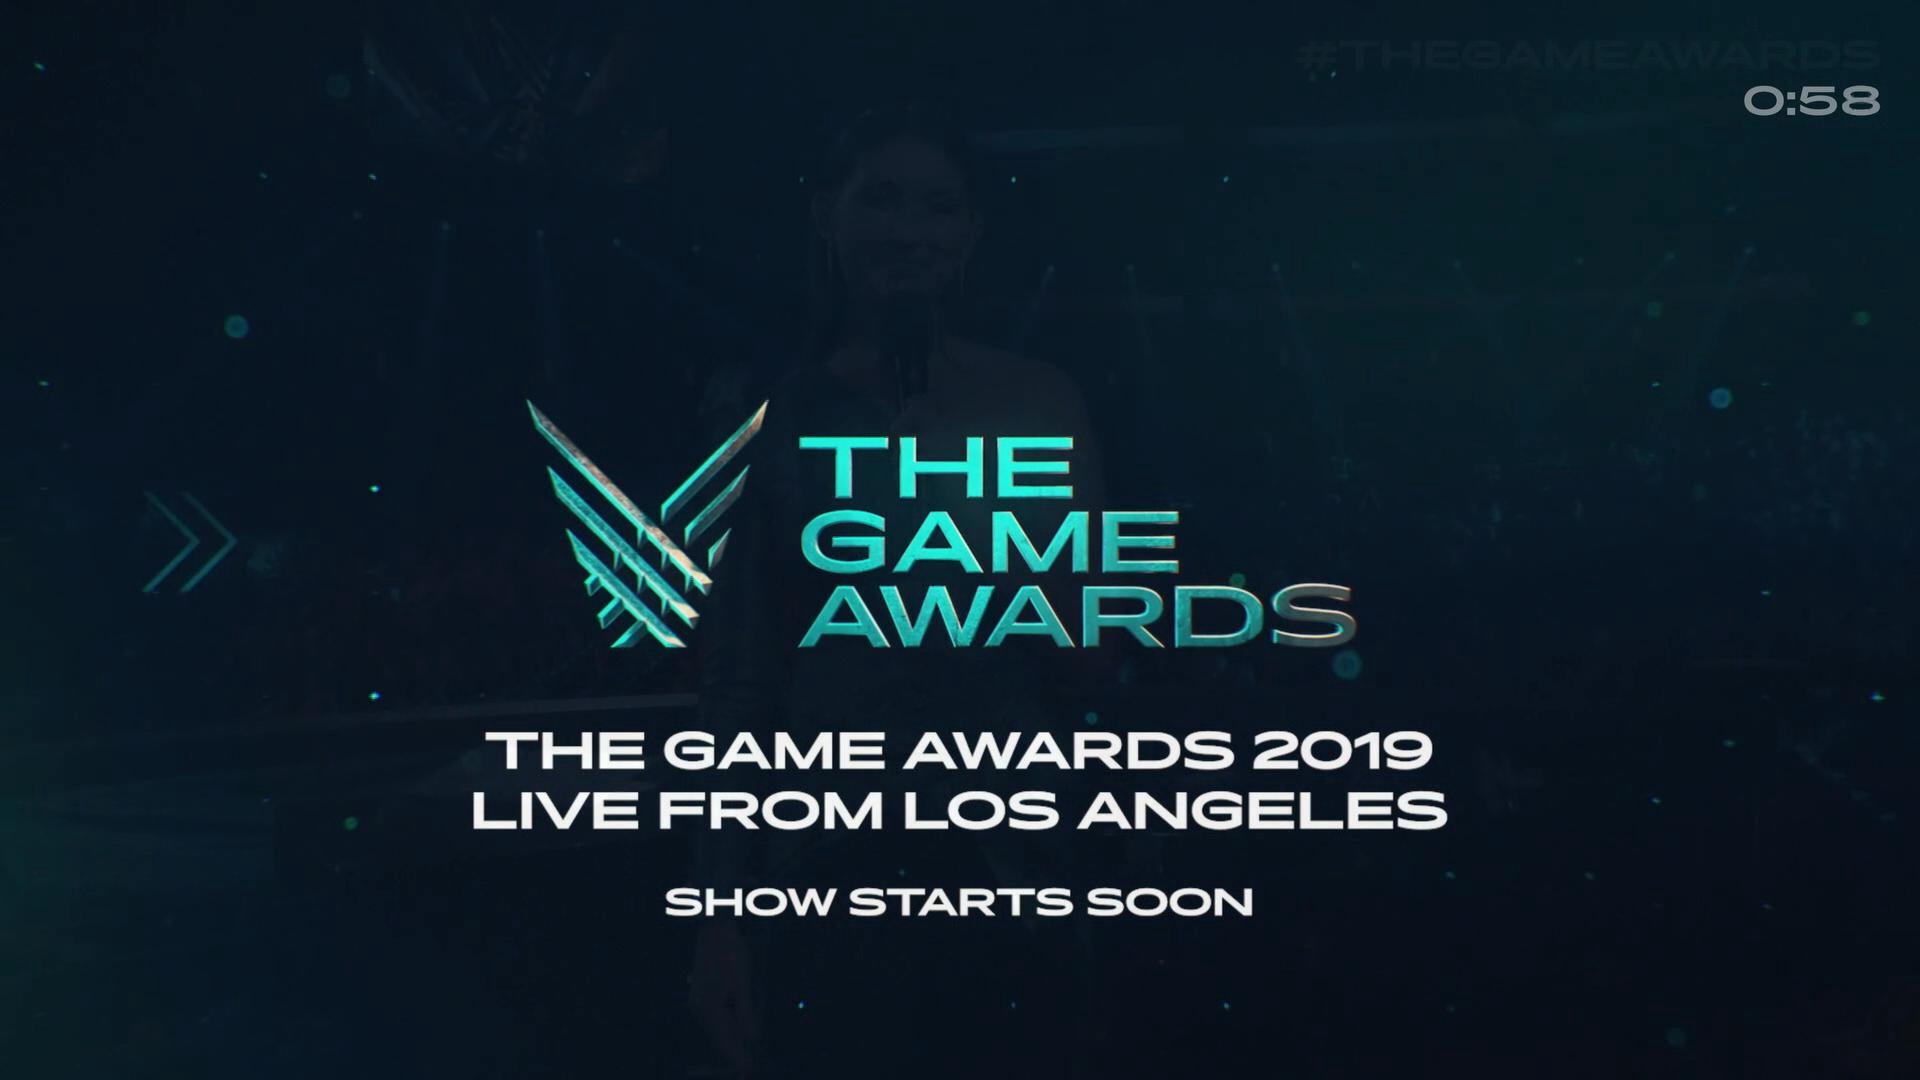 The Game Awards 2019 on Twitch on December 12